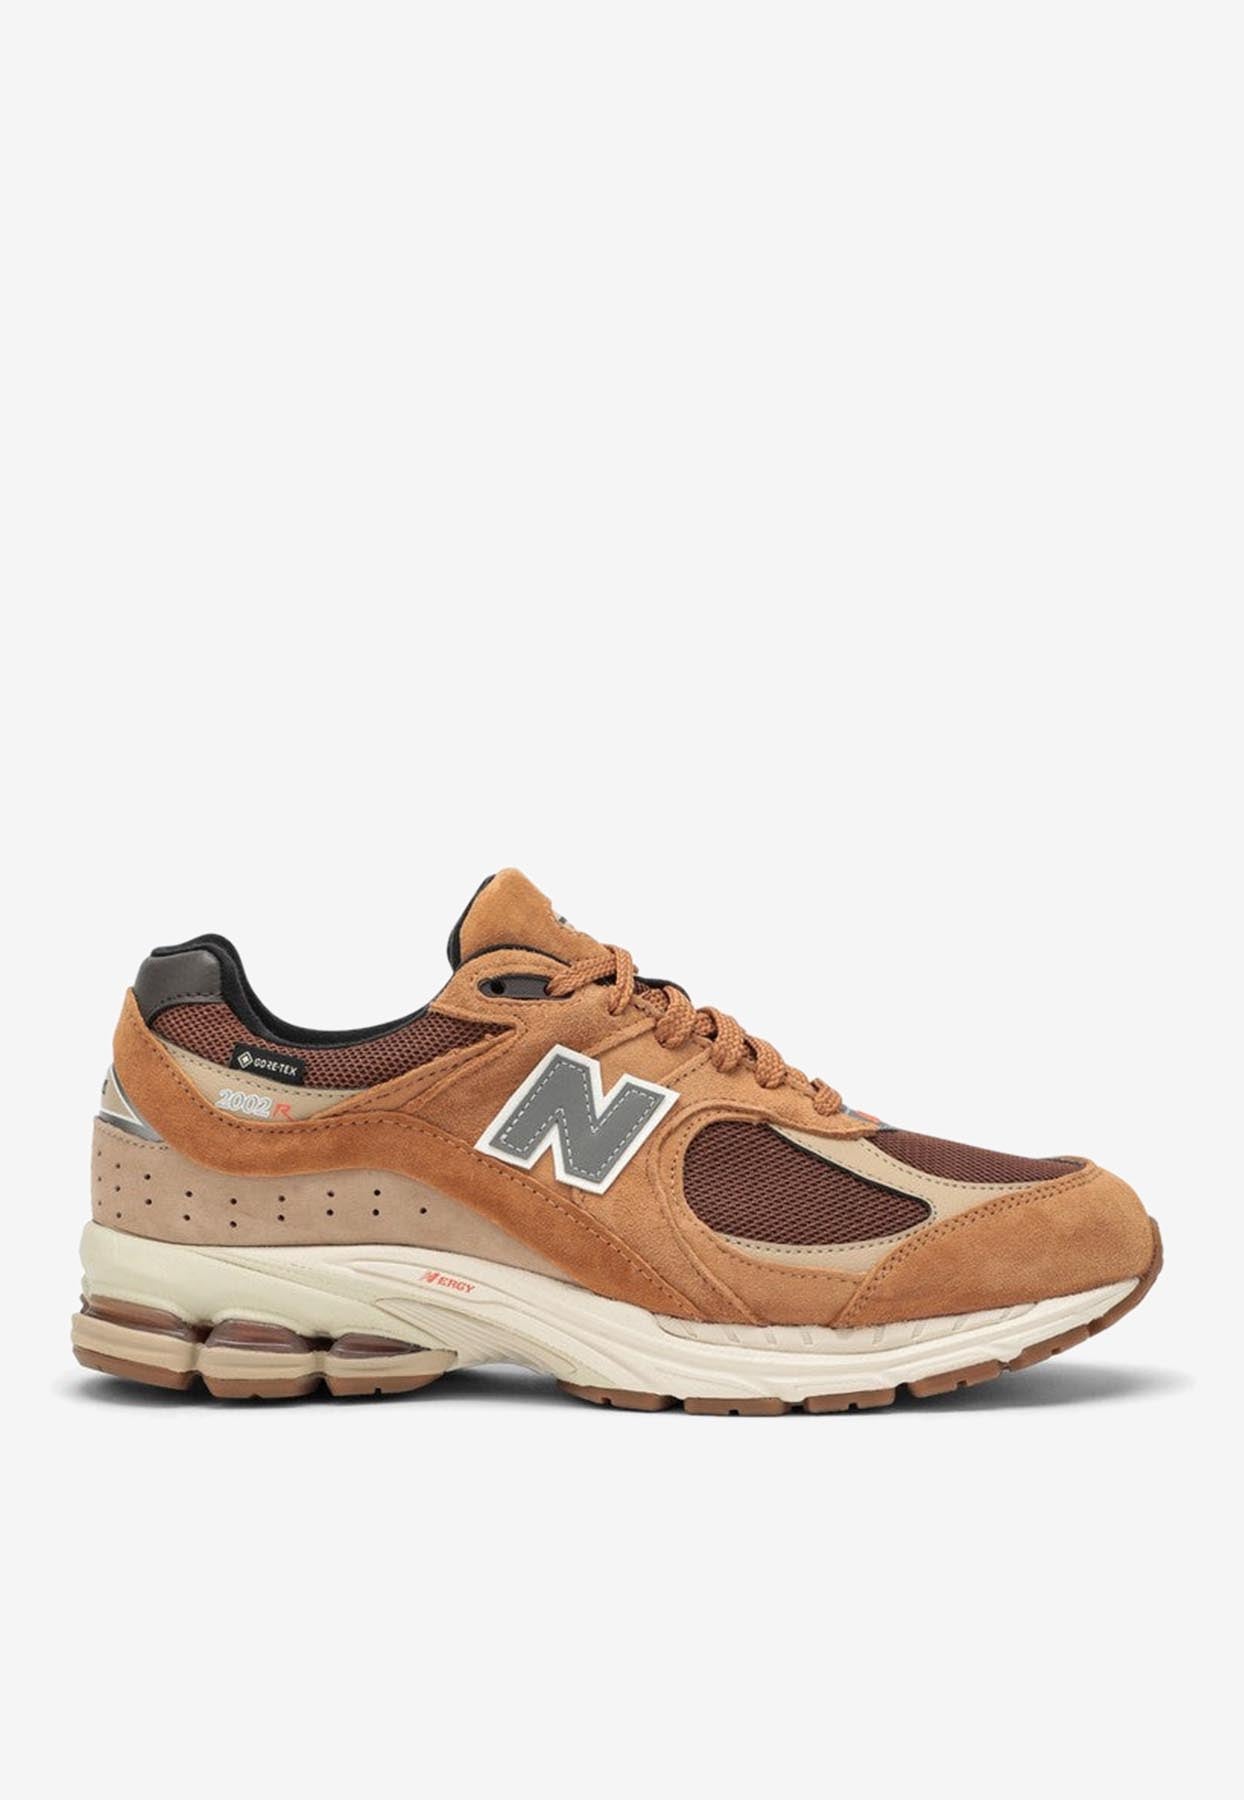 New Balance 2002r Gtx Low-top Sneakers In Tobacco | ModeSens